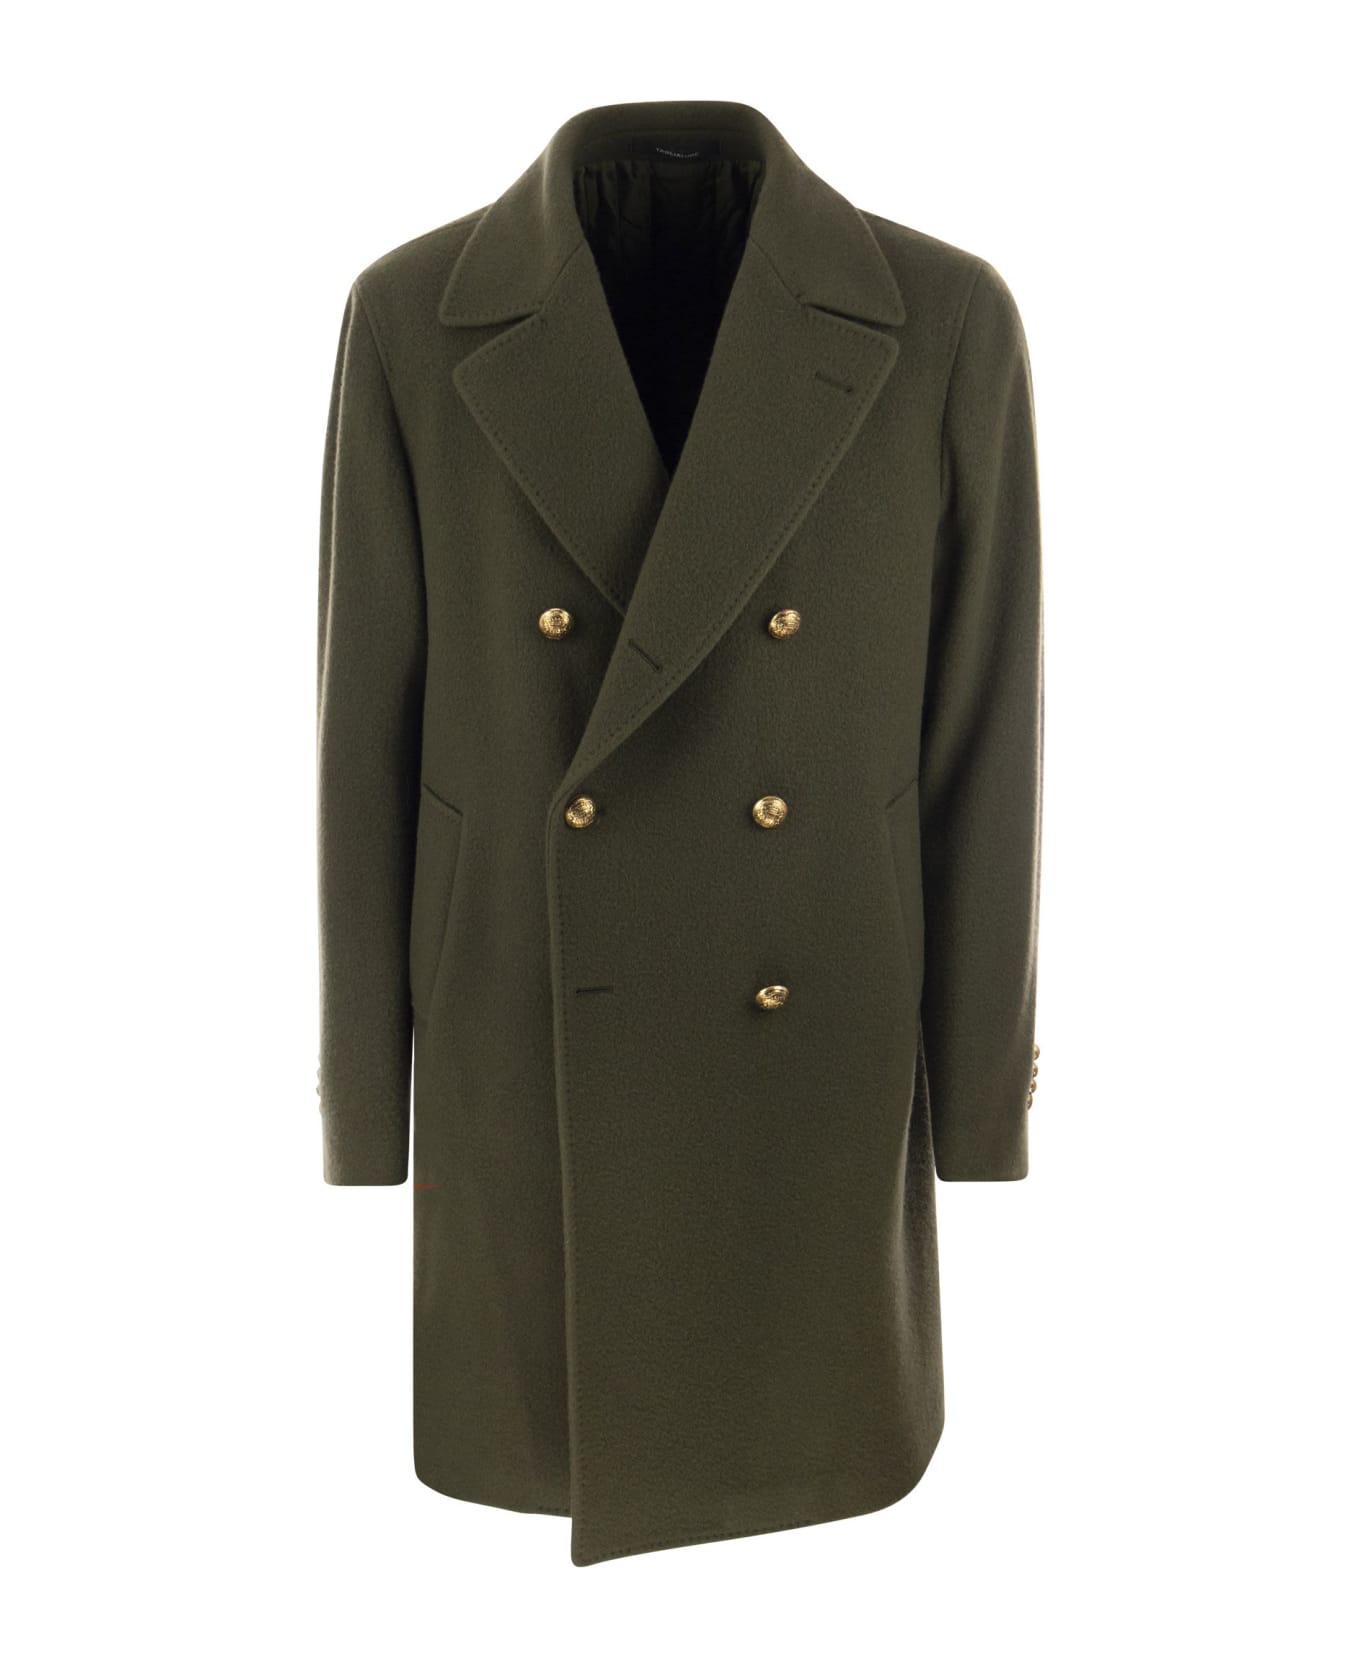 Tagliatore Arden - Double-breasted Wool Coat - Military Green コート